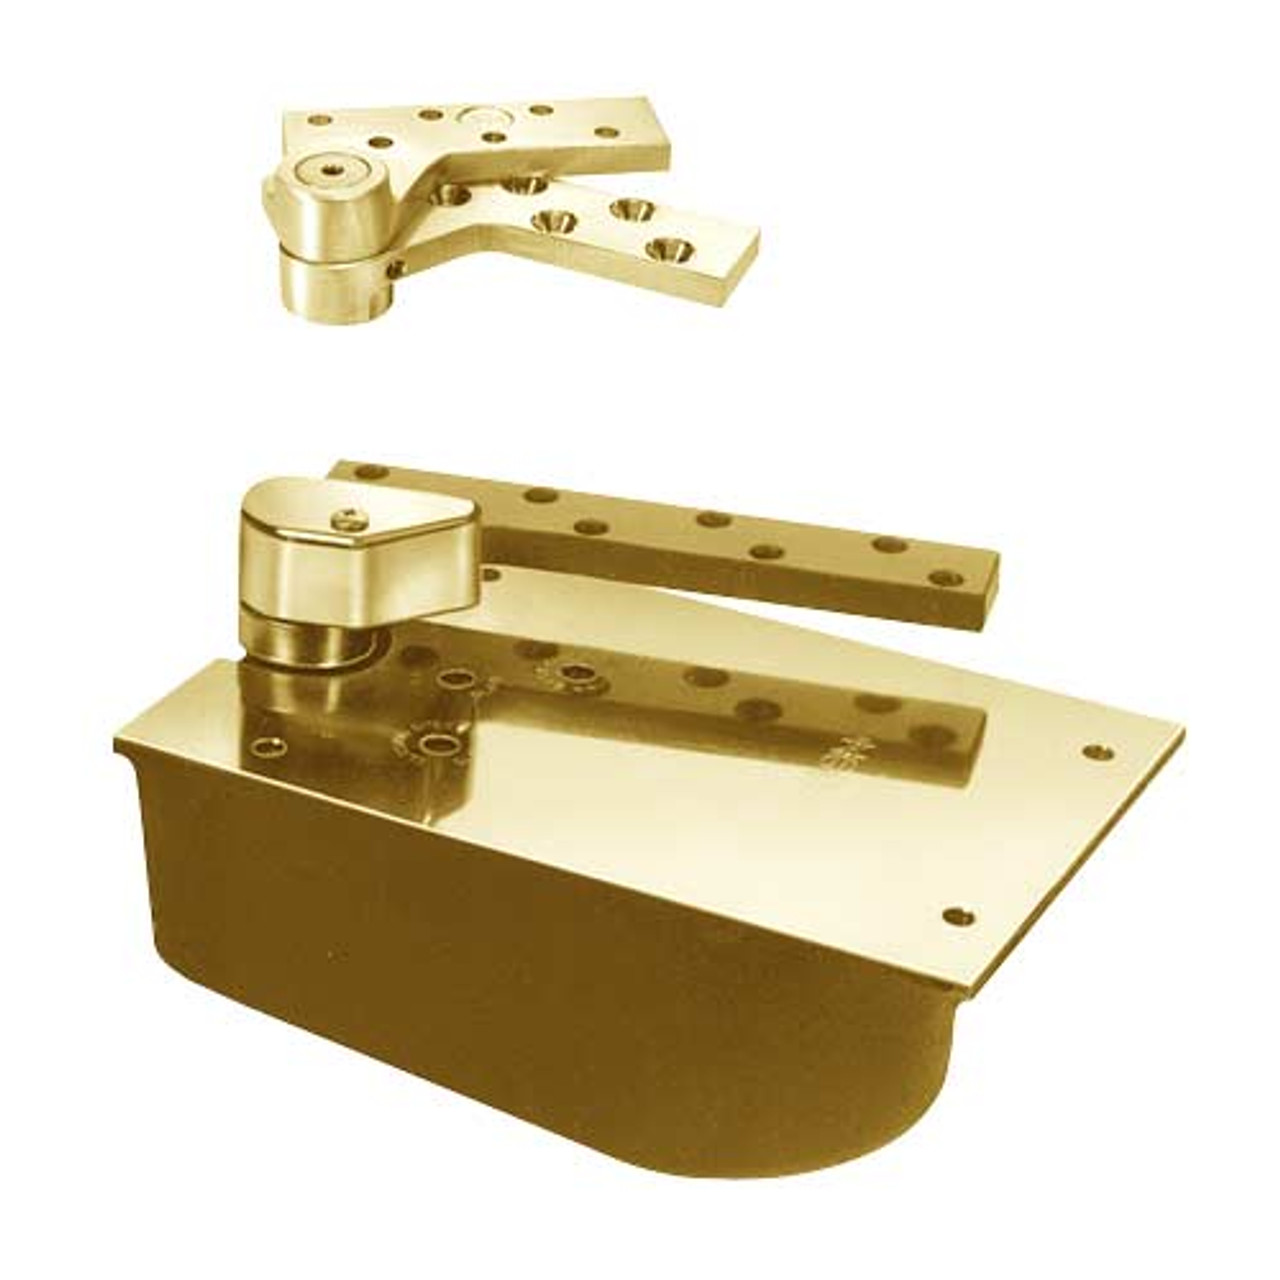 L27-90N-CWF-LH-2-1/2-605 Rixson 27 Series Extra Heavy Duty Lead Lined Offset Floor Closer in Bright Brass Finish